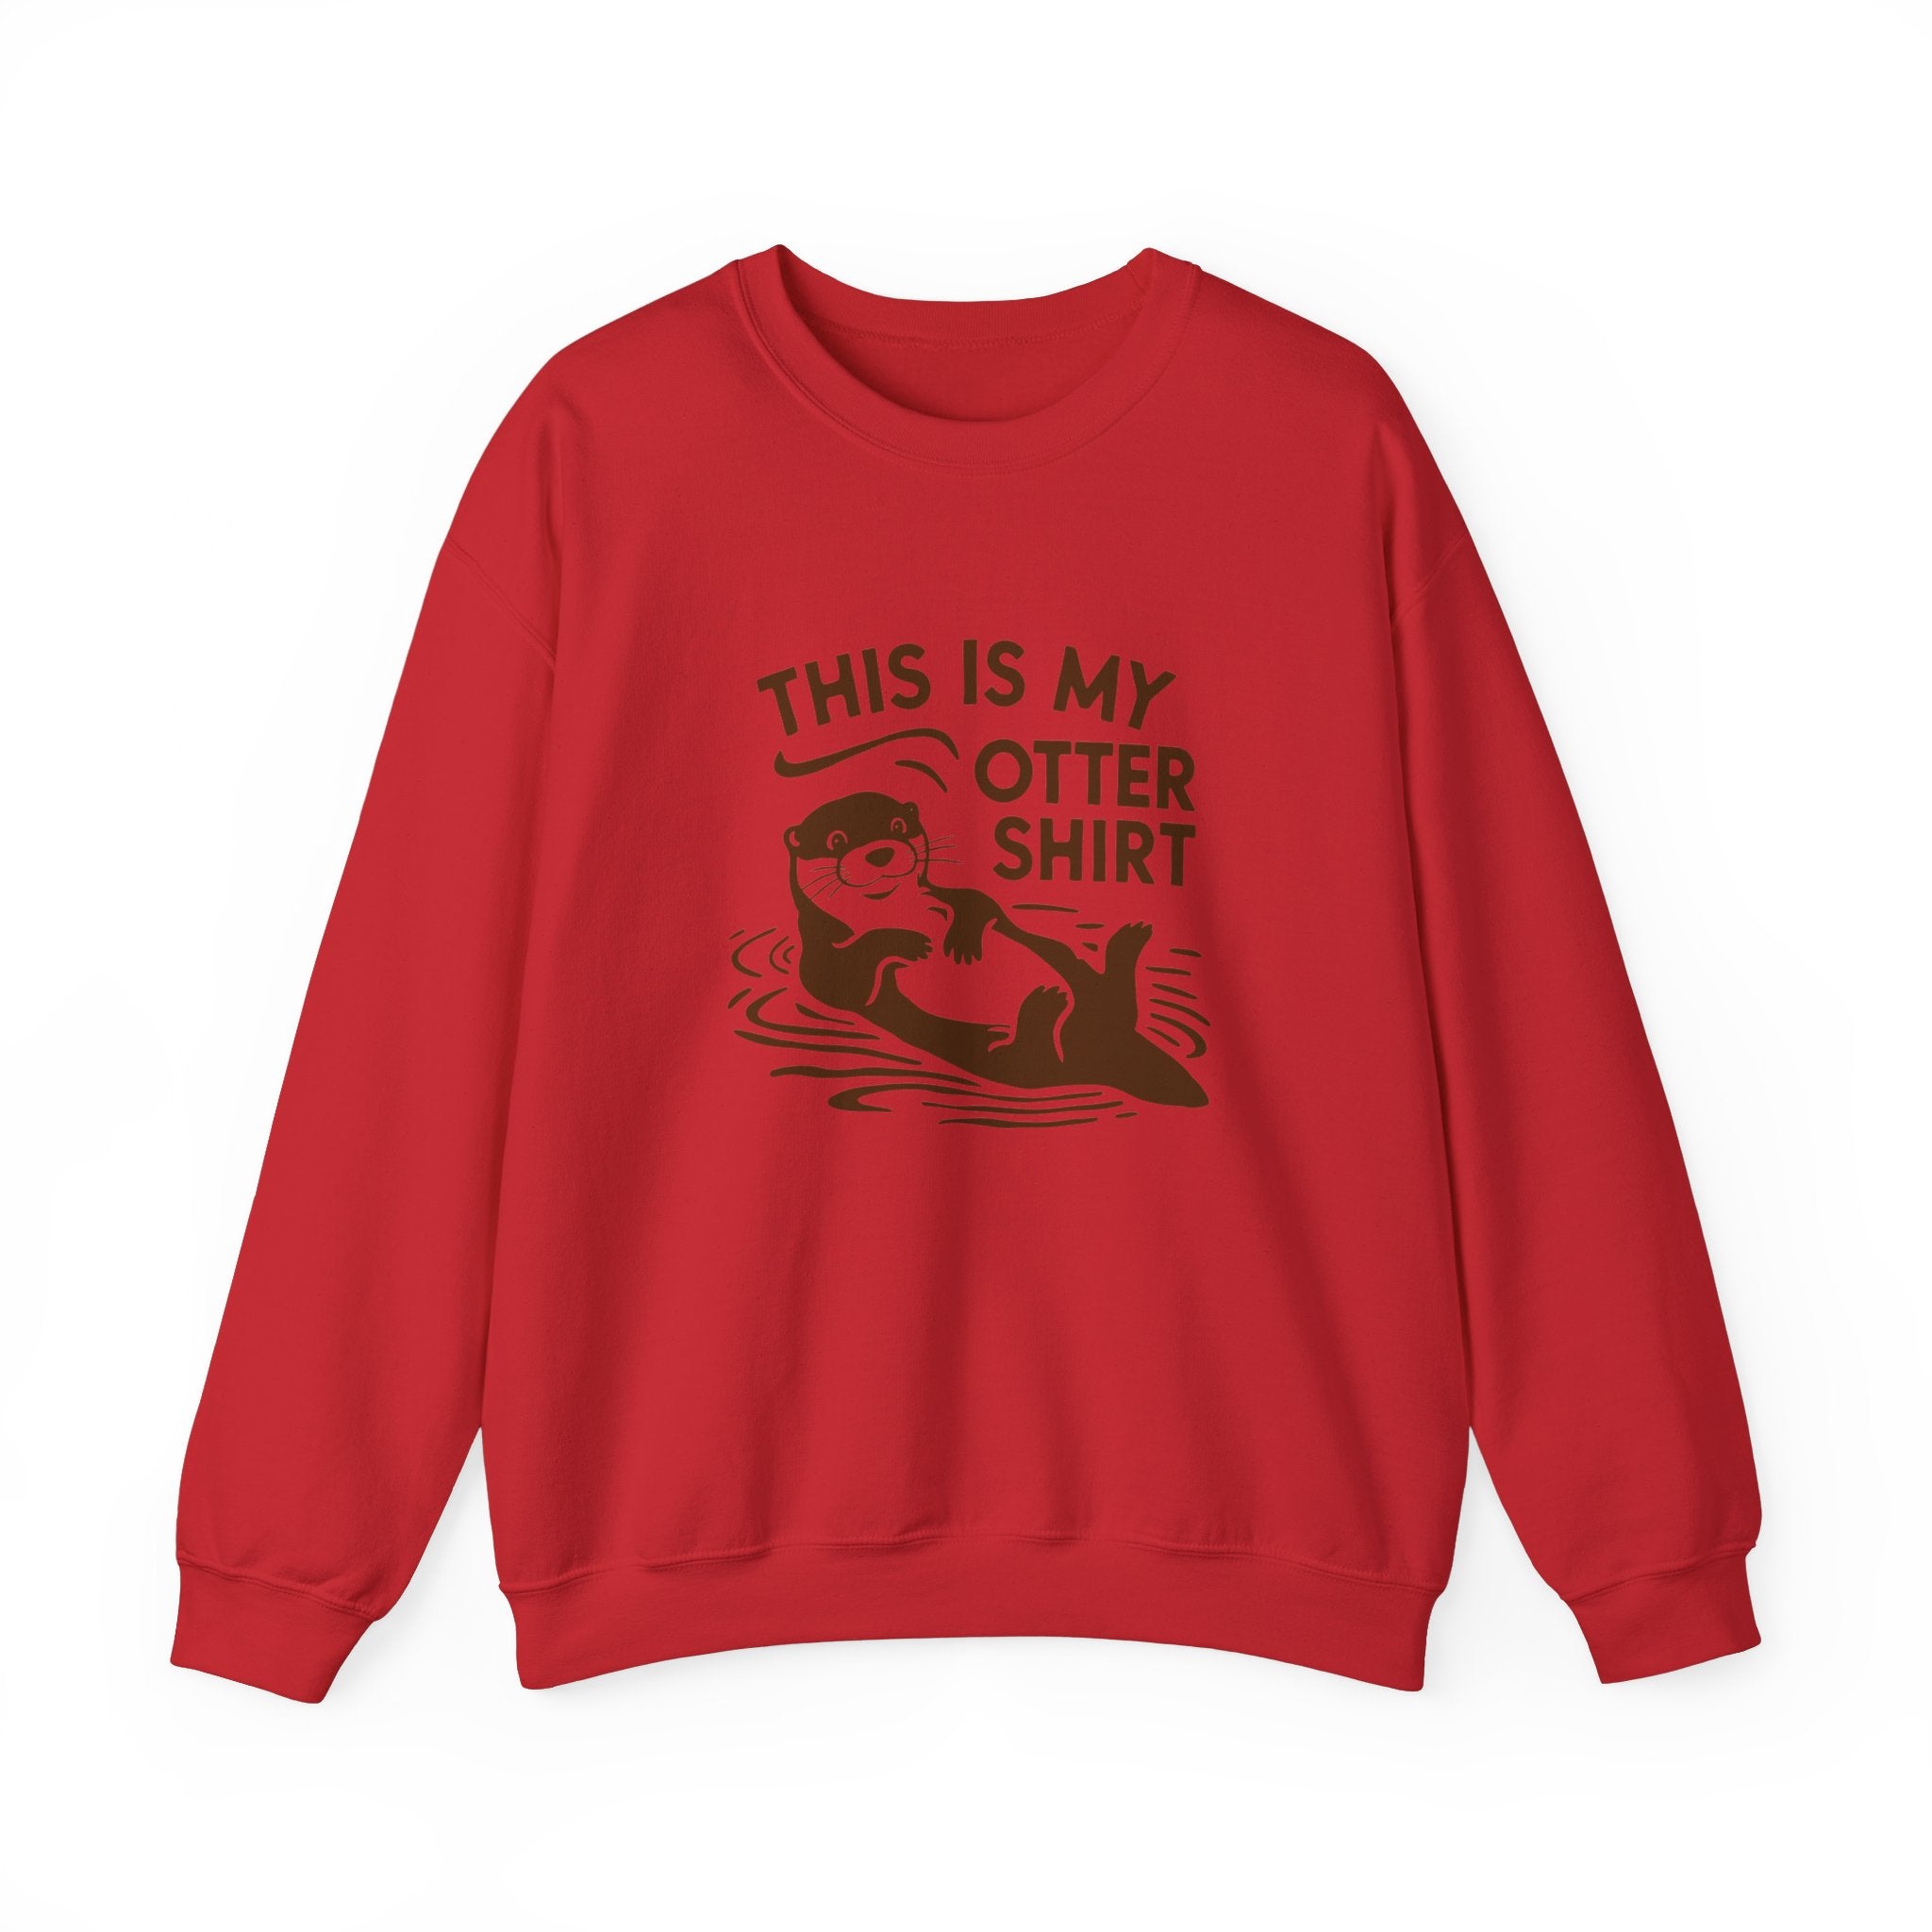 My Otter Shirt - Sweatshirt featuring a cartoon otter and the text "This is My Otter Shirt" in black font, perfect for chilly seasons.